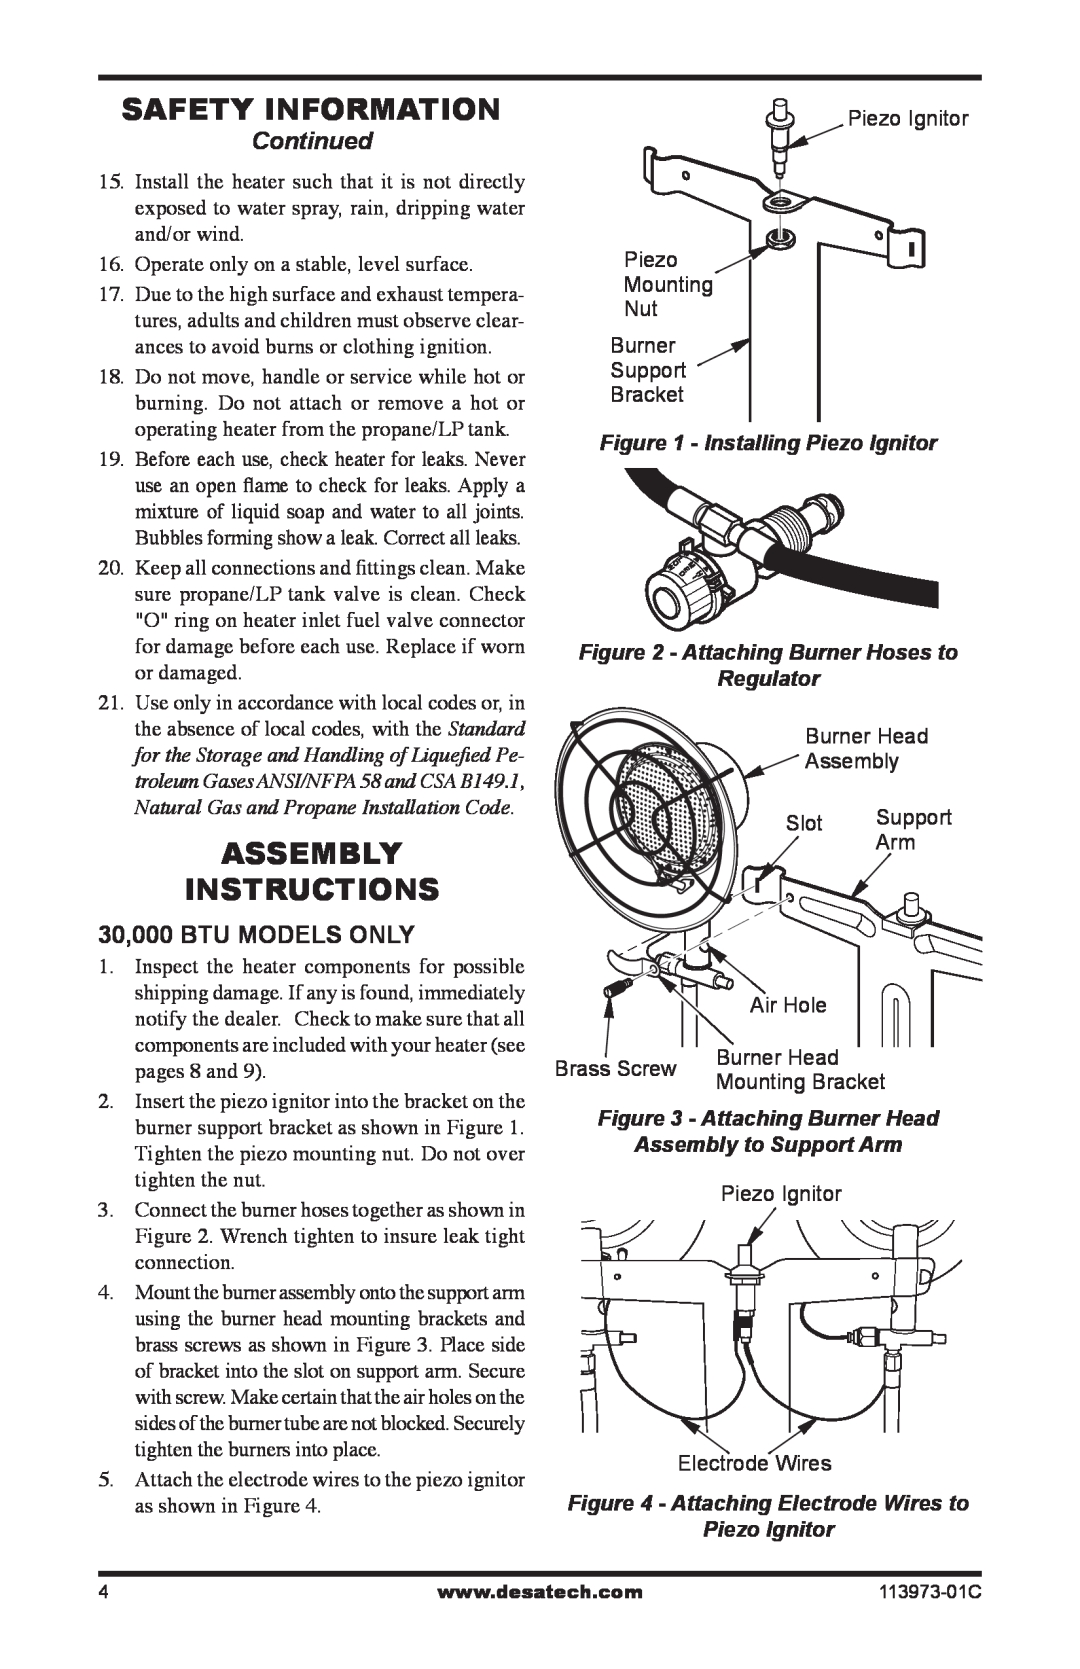 Desa AND TT15A 10 Safety Information, Assembly Instructions, Continued, 30,000 BTU MODELS ONLY, Installing Piezo Ignitor 